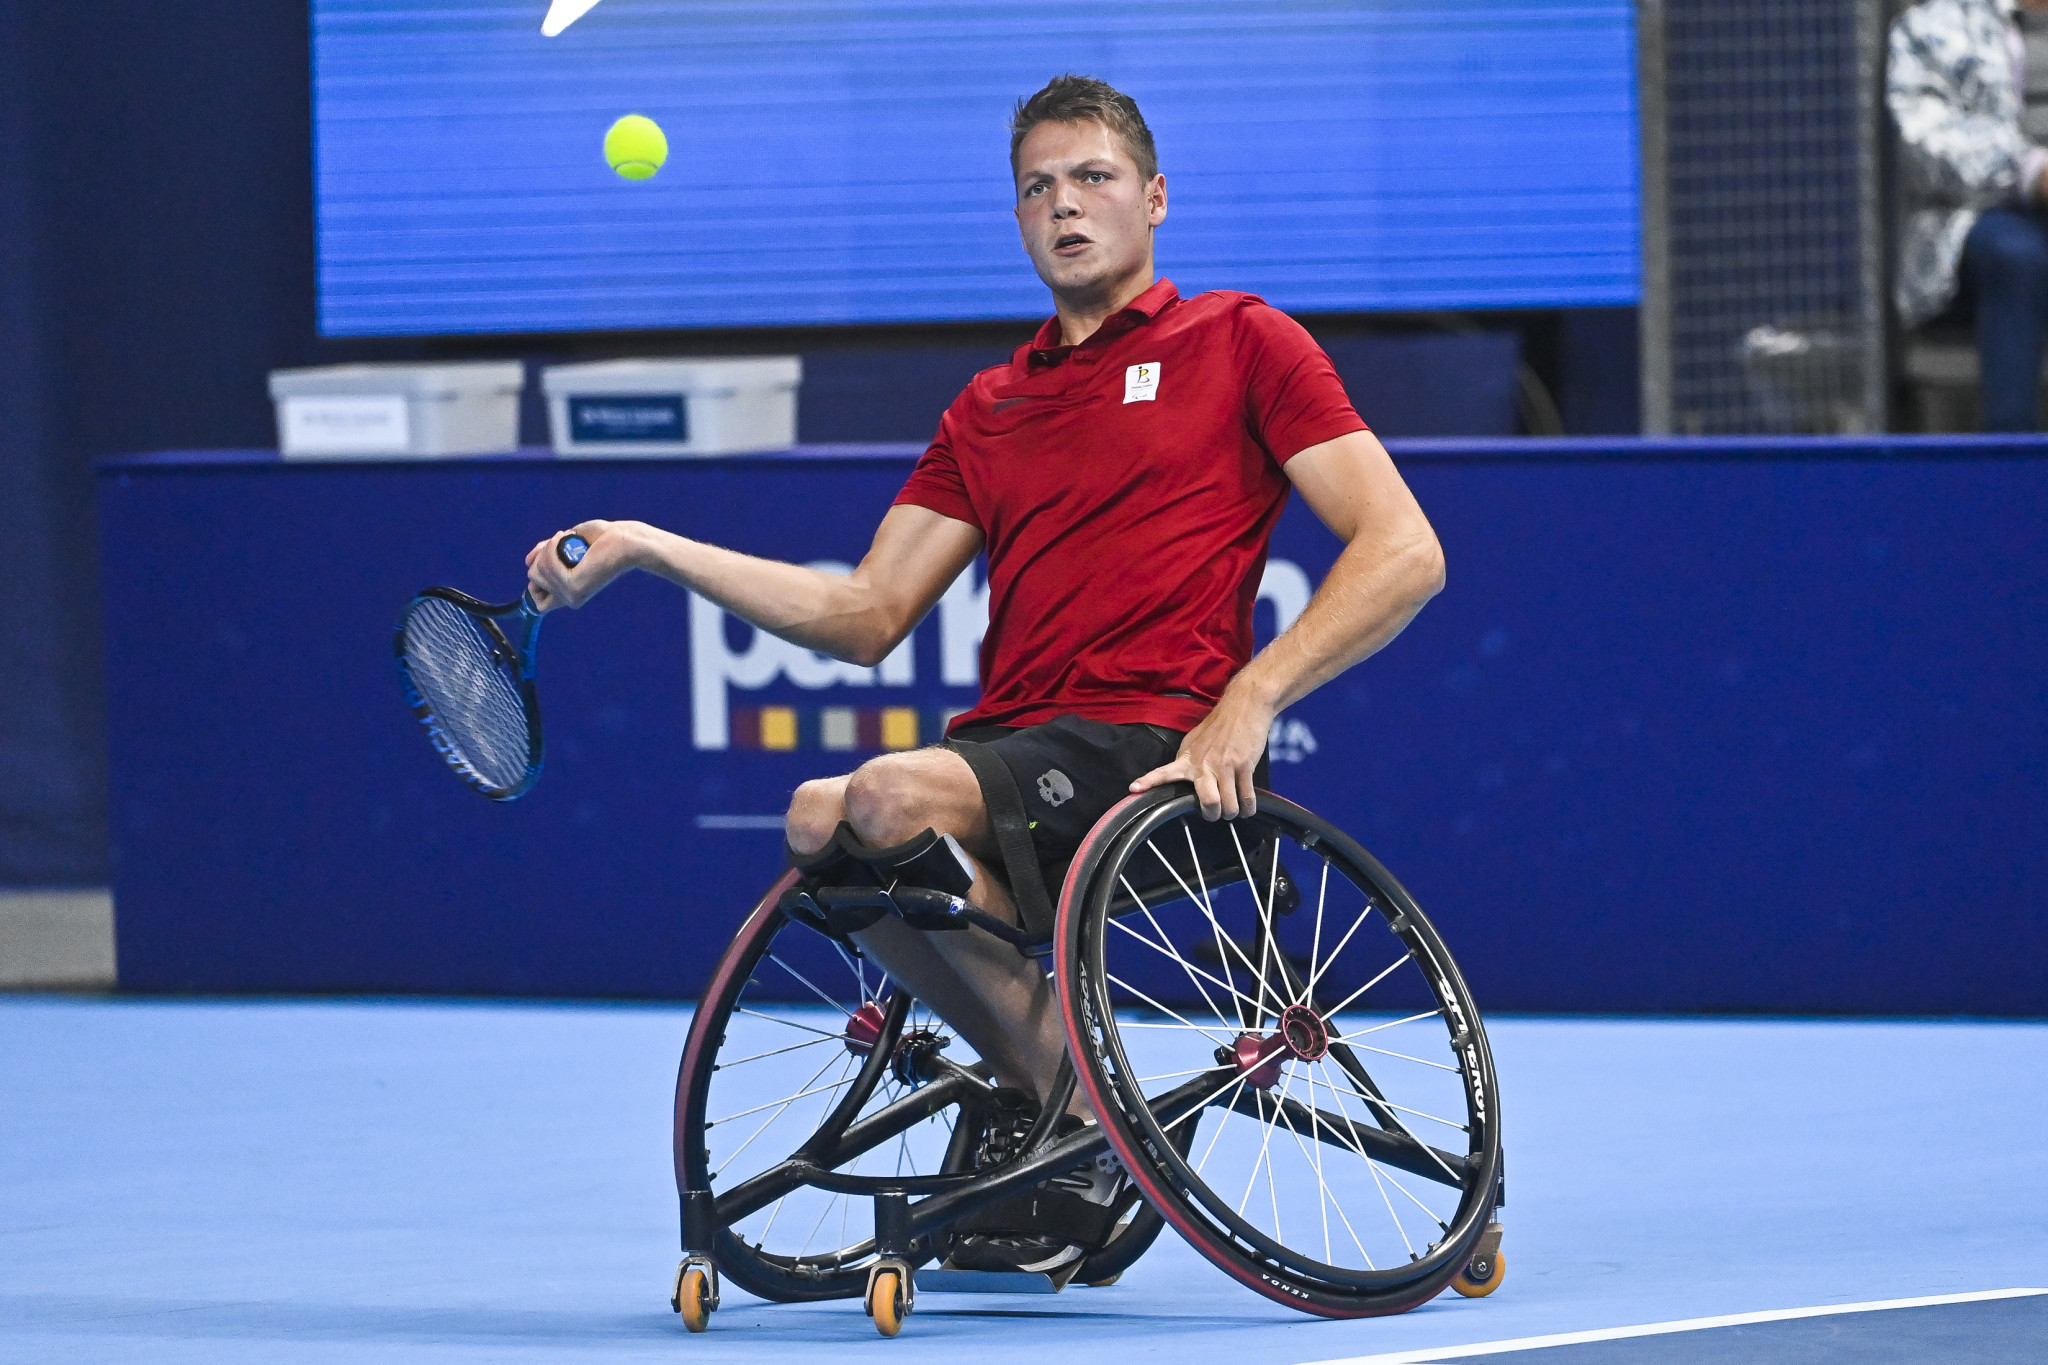 Netherlands continues strong start at Wheelchair Tennis World Team Cup